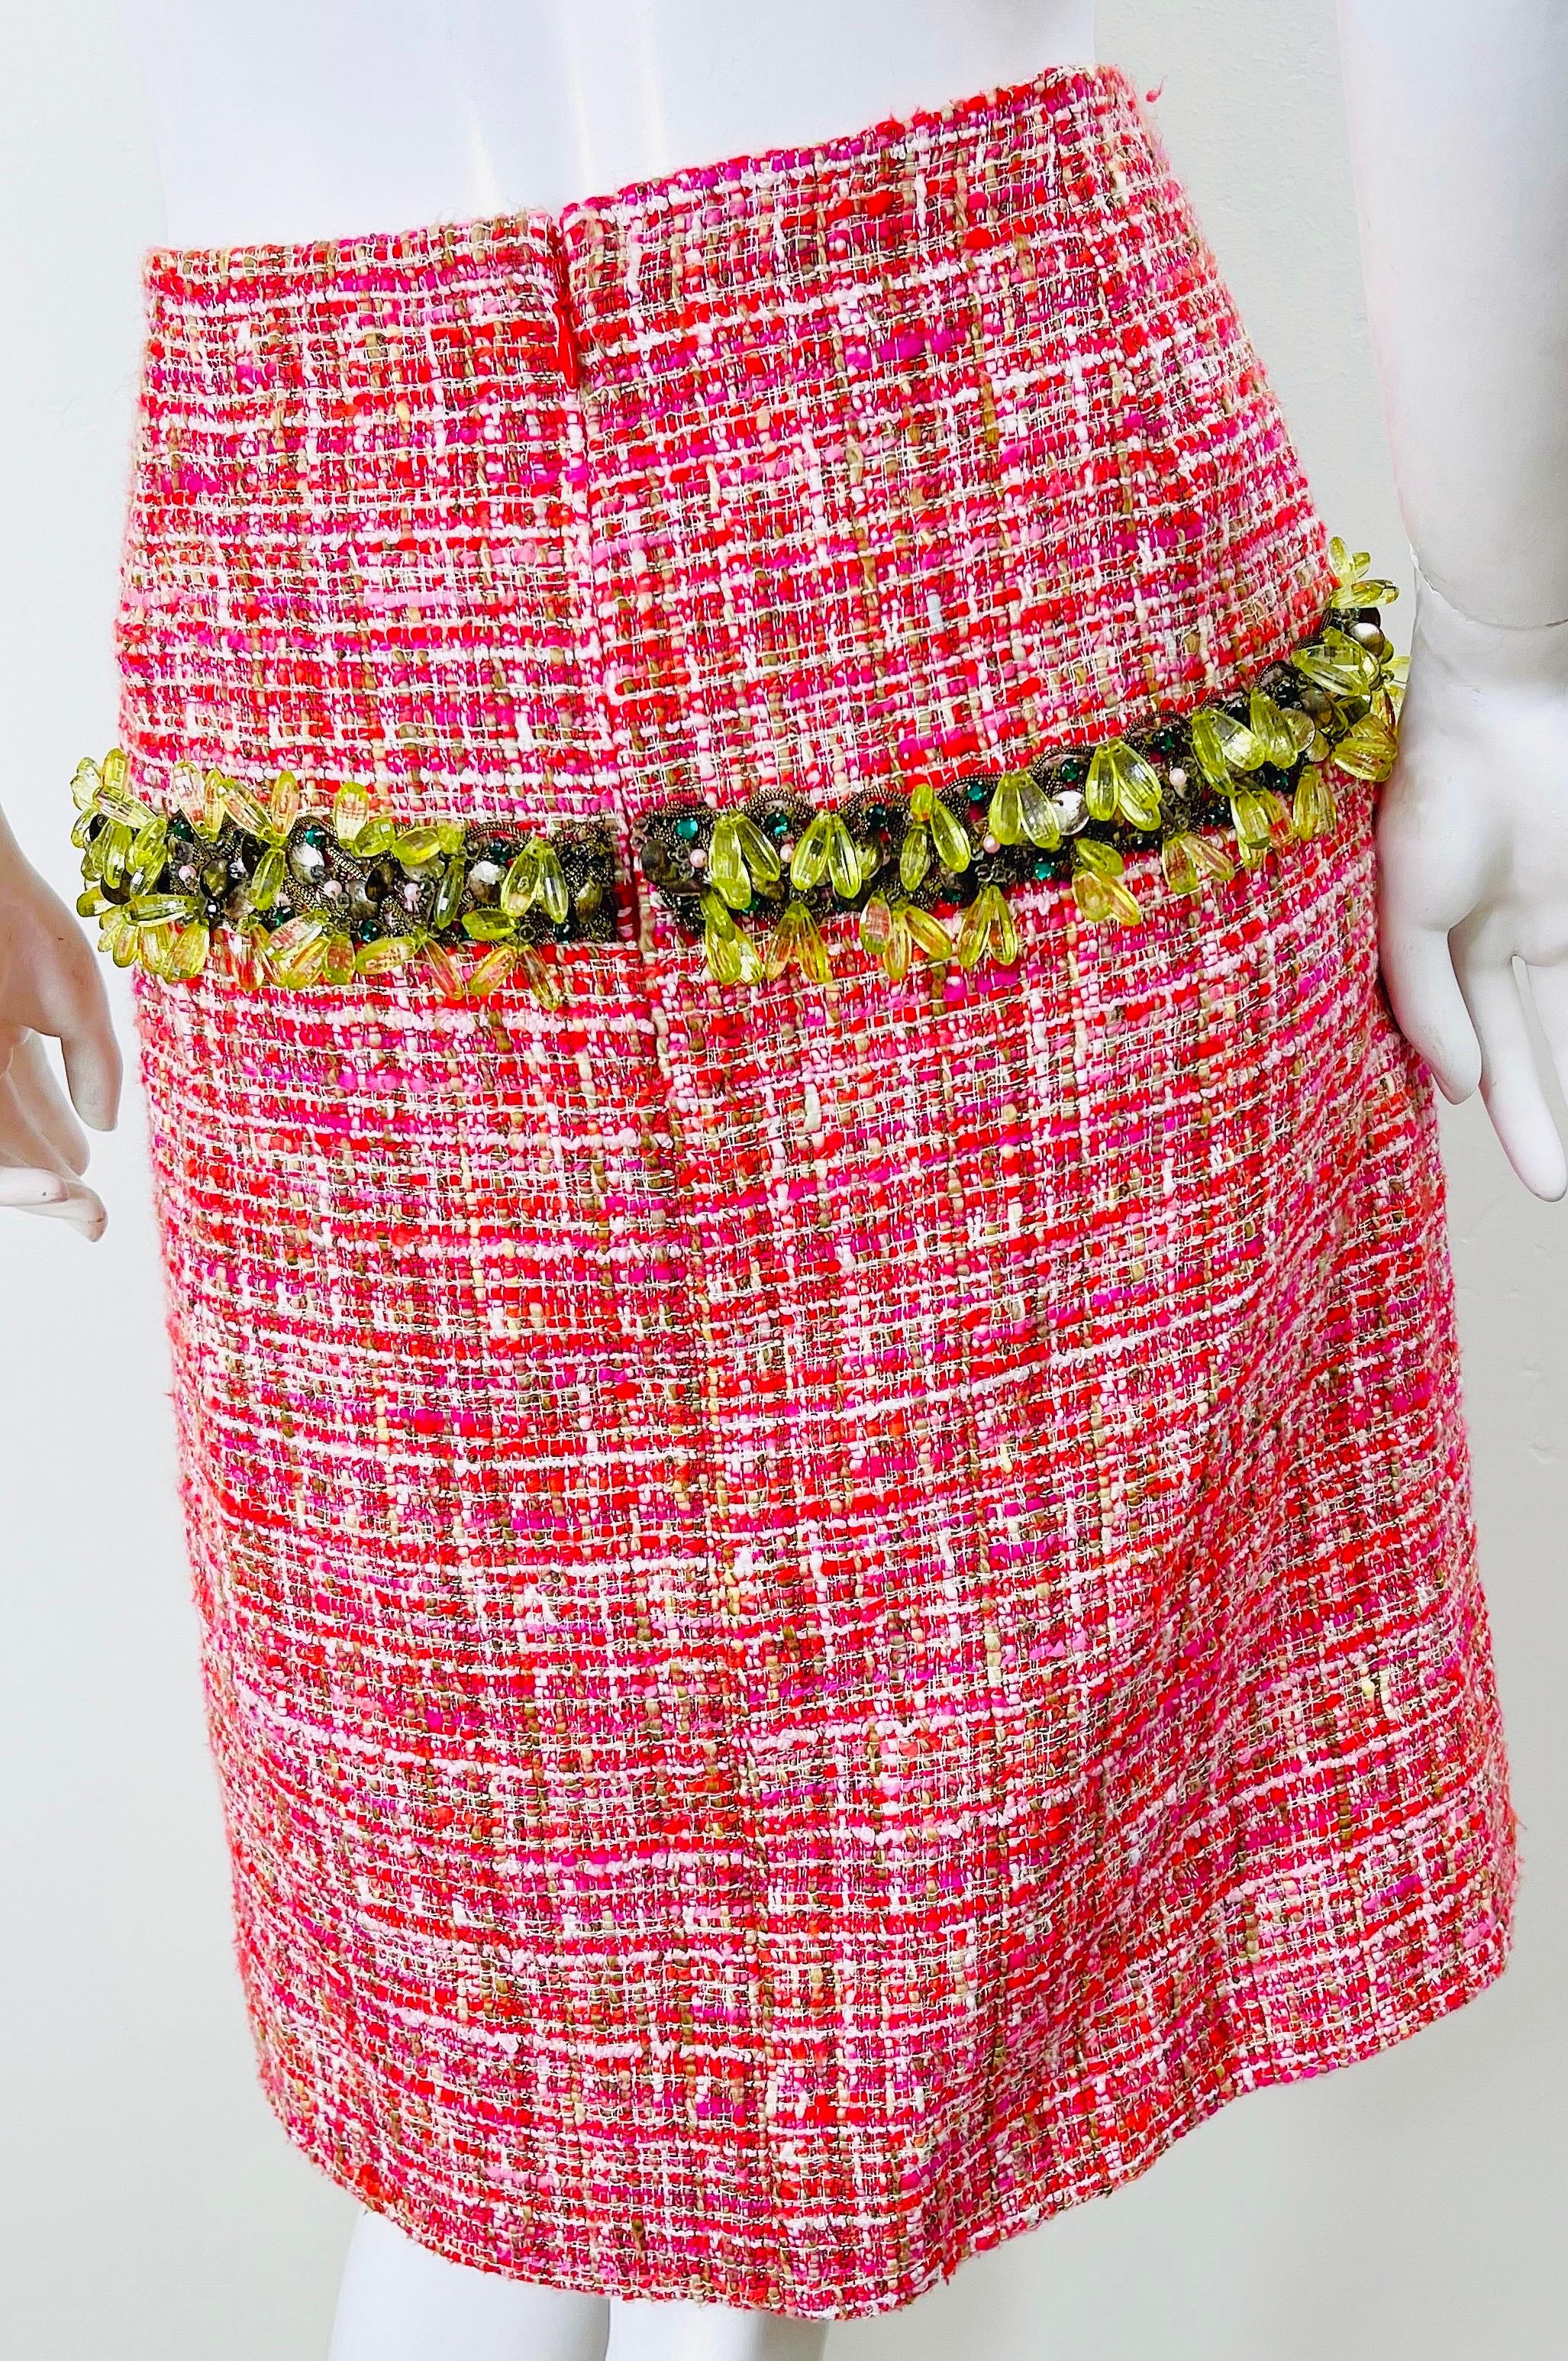 Women's 1990s Dolce & Gabbana Size 42 6-8 Hot Pink Colorful Beaded Jeweled Vintage Skirt For Sale